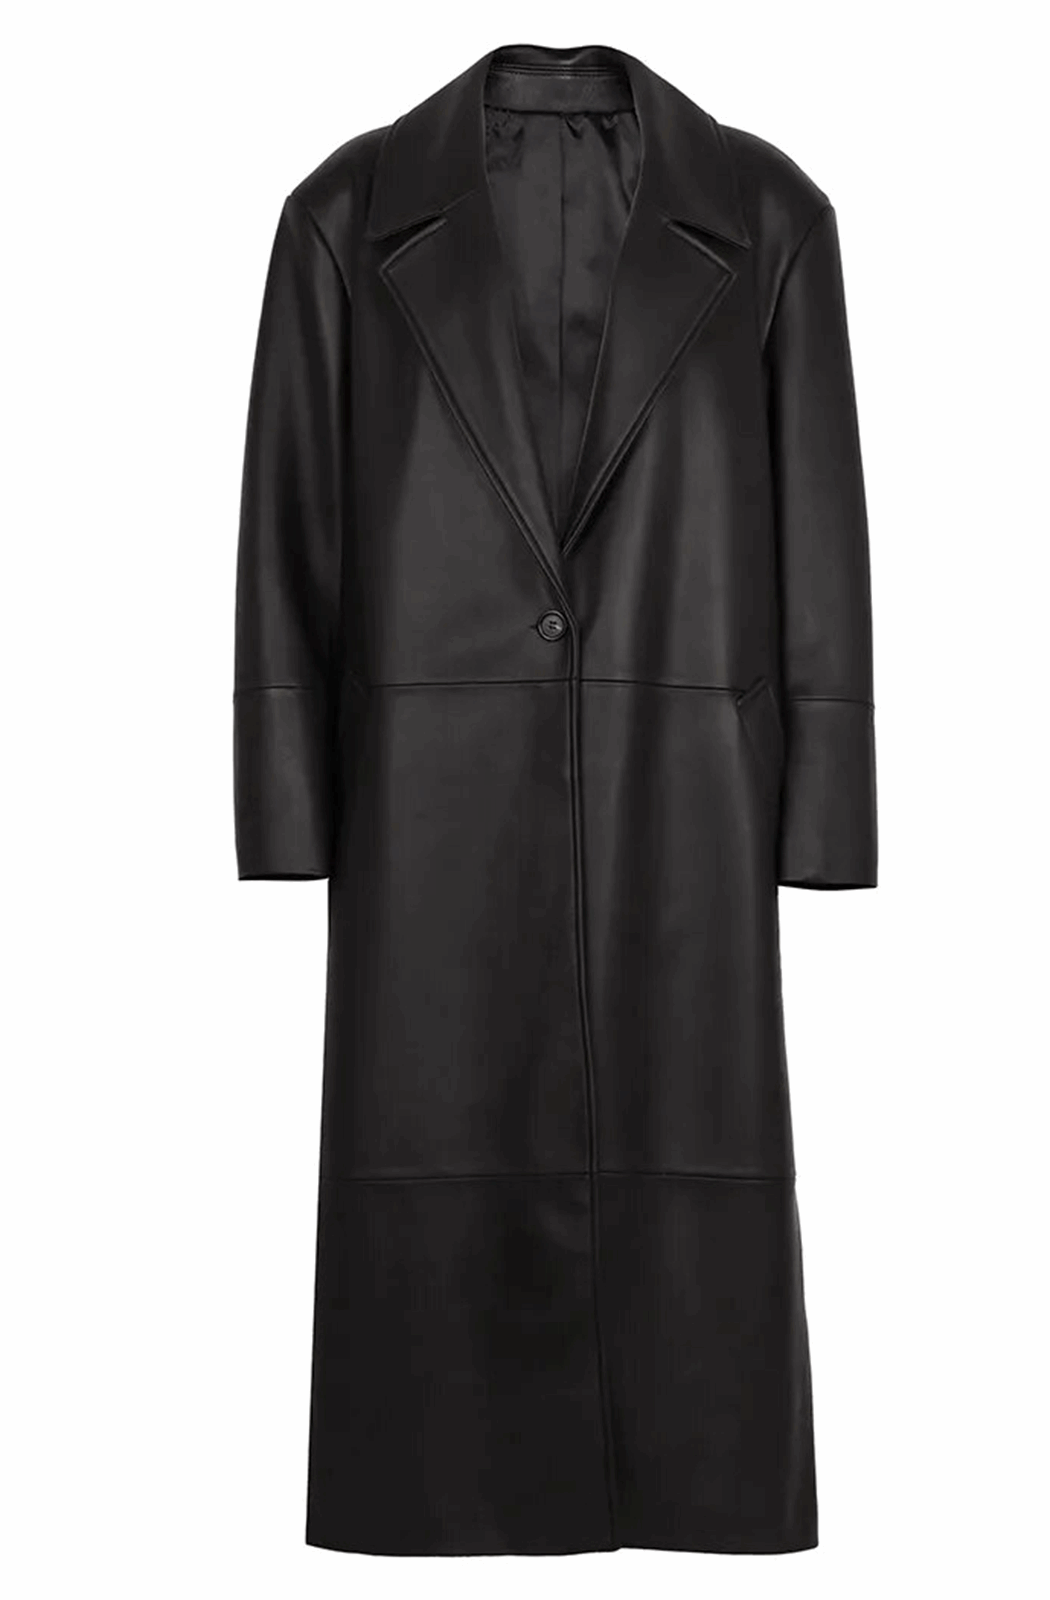 Real leather black trench coat